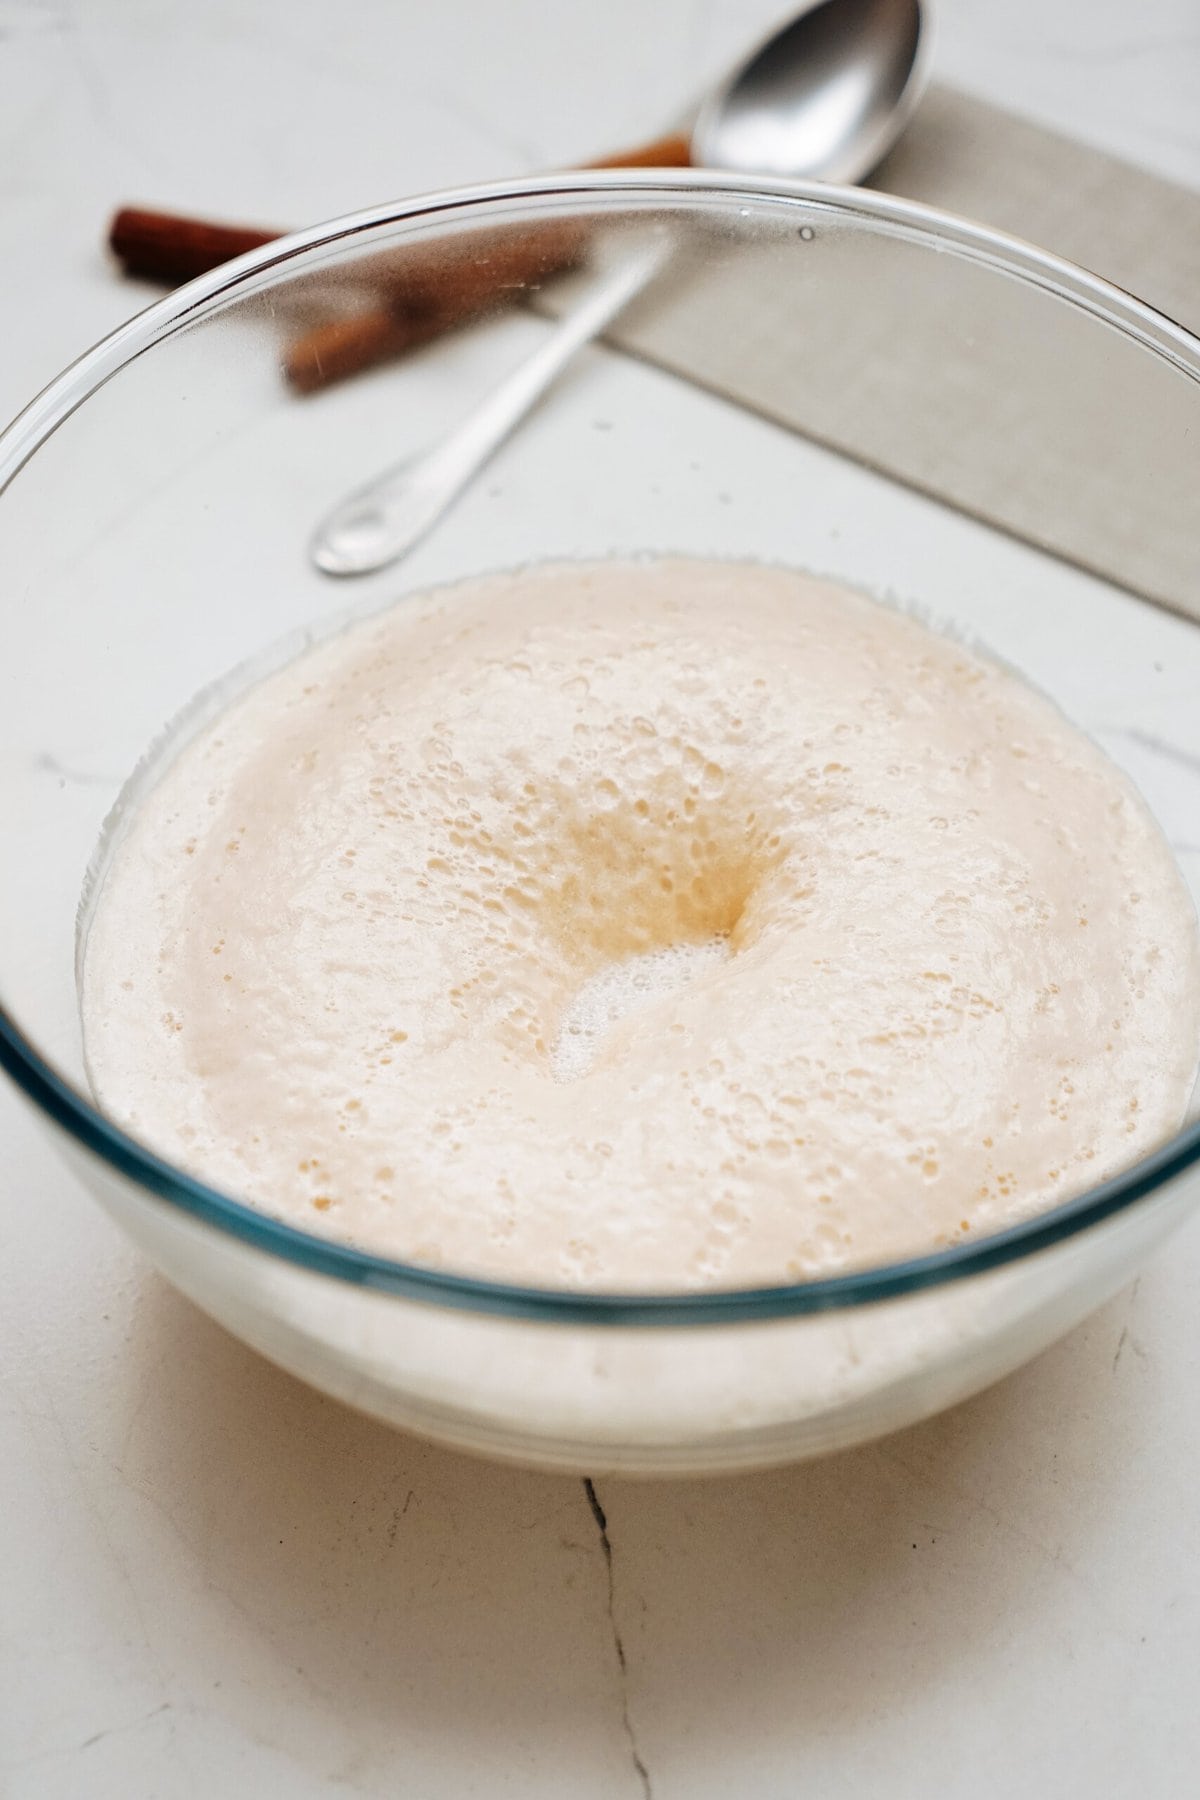 A glass bowl with frothy, activated yeast mixture, with a spoon and kitchen towel in the blurred background on a white surface.